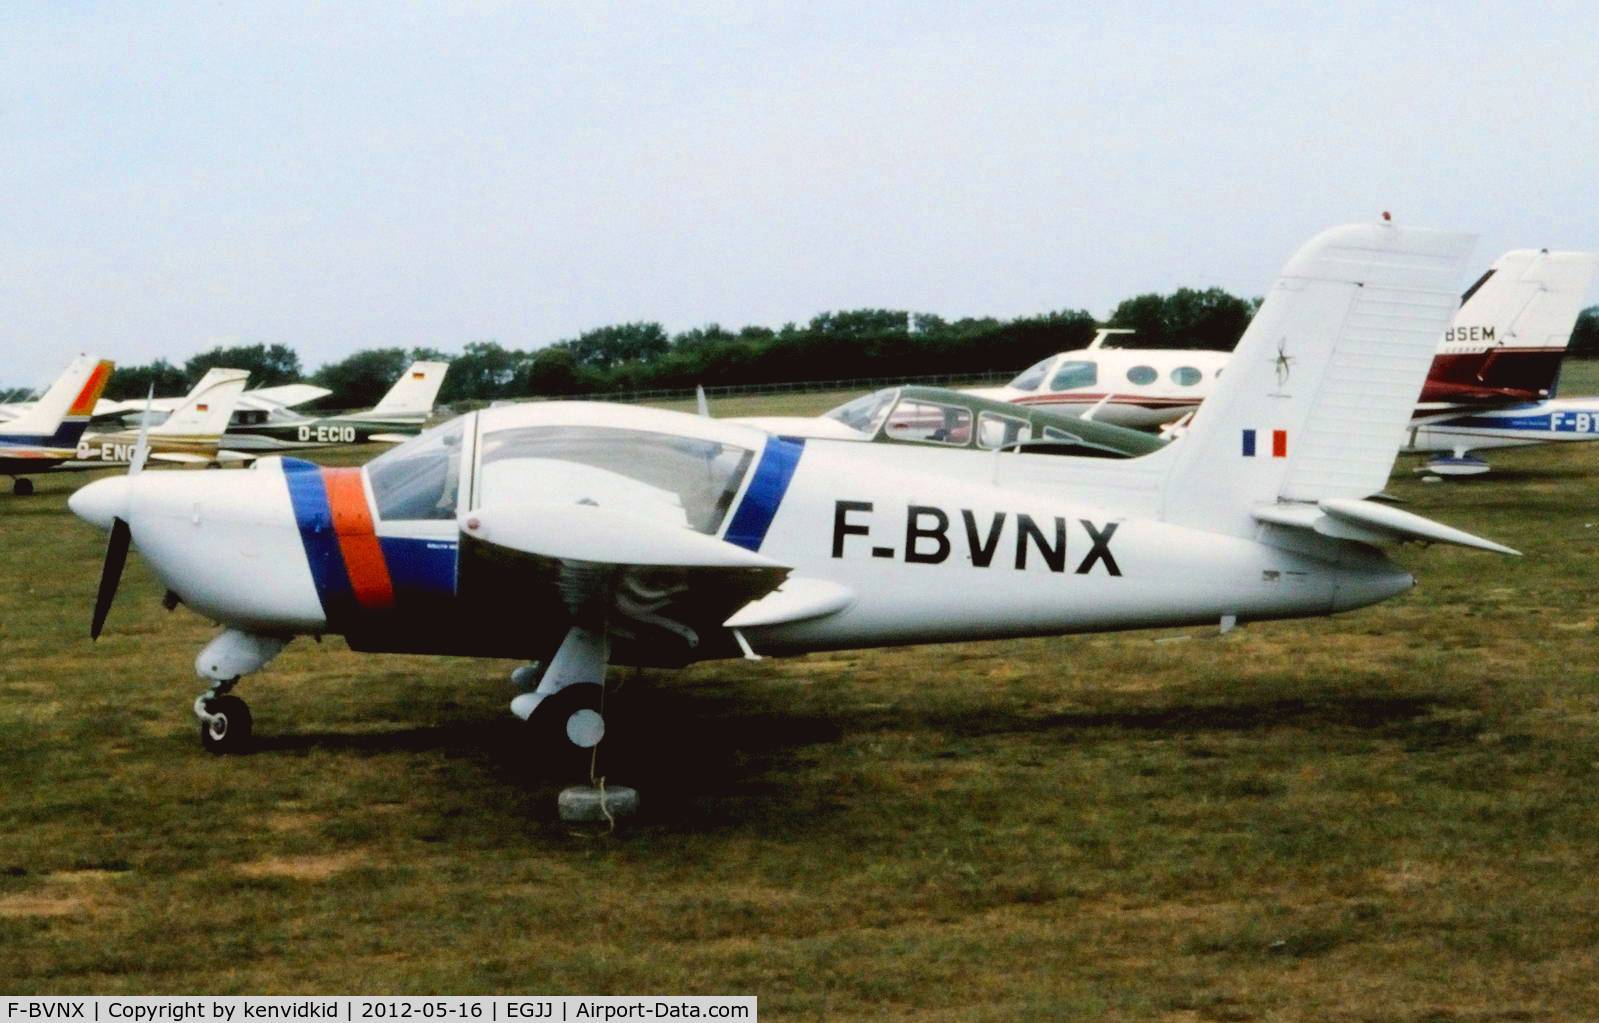 F-BVNX, Socata MS-893E Rallye 180GT C/N 12528, At Jersey airport early 1970's.
Scanned from slide.